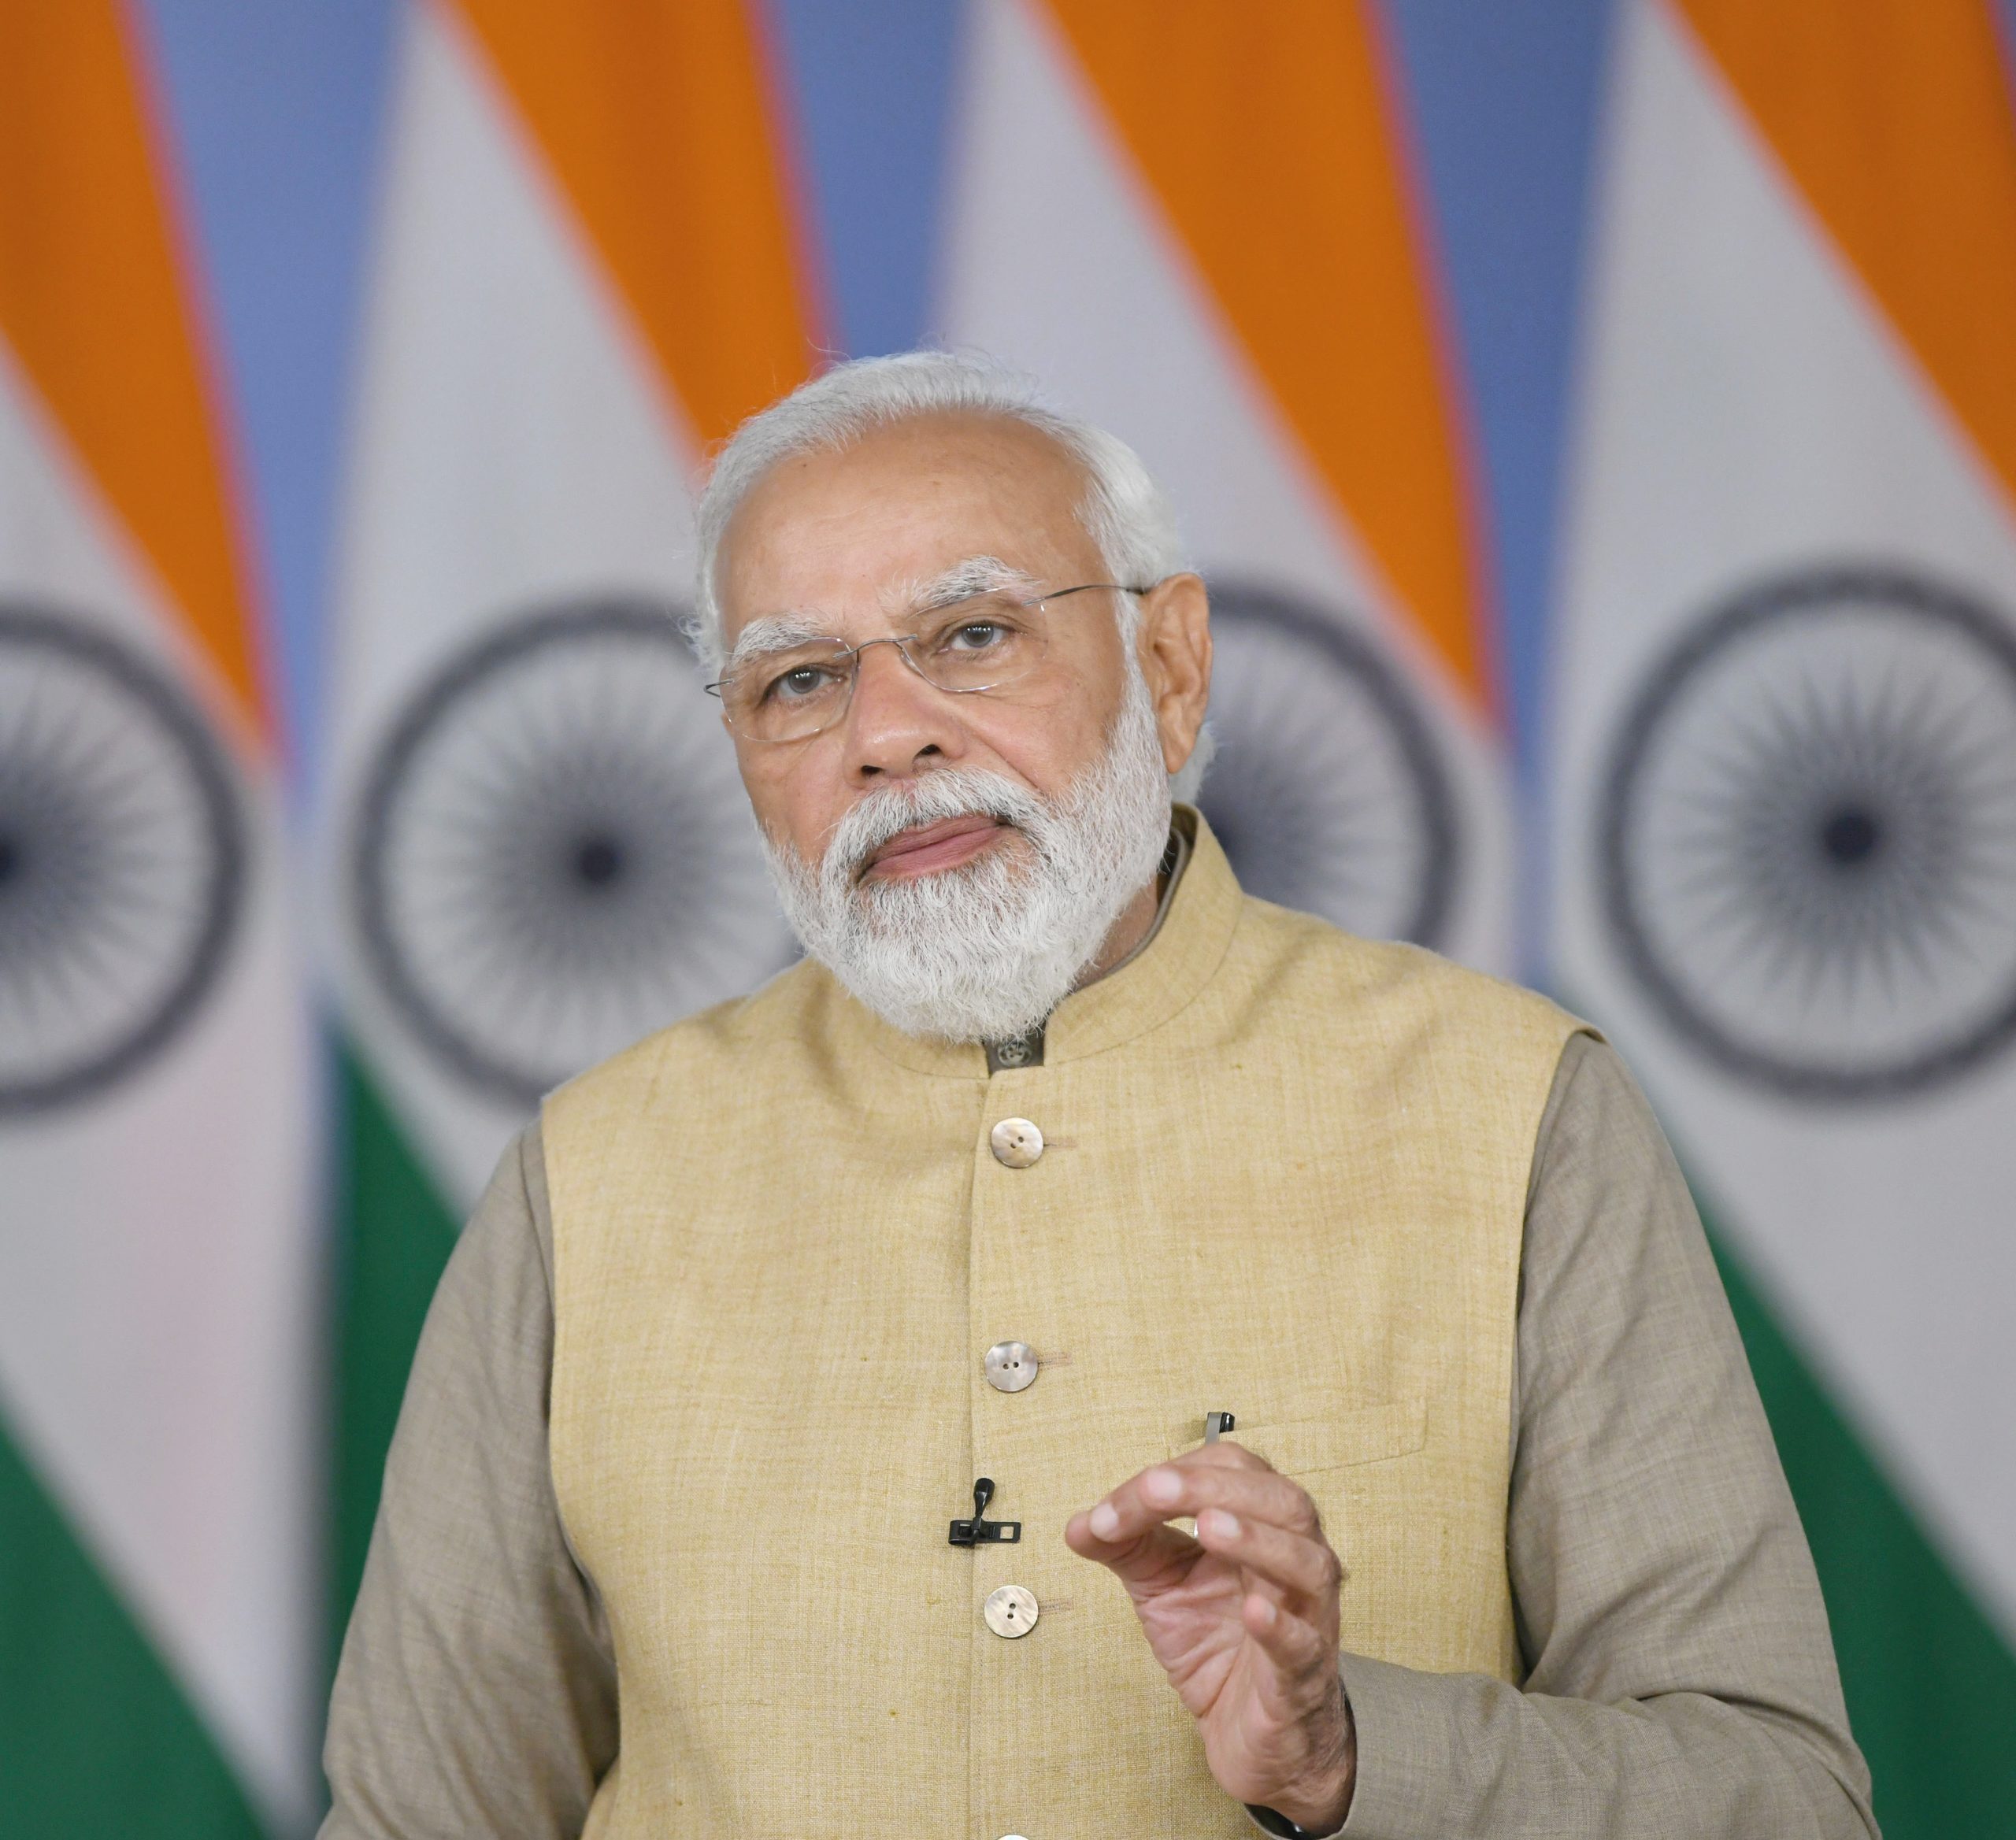 India can’t afford to remain stagnant at this juncture, says PM Modi